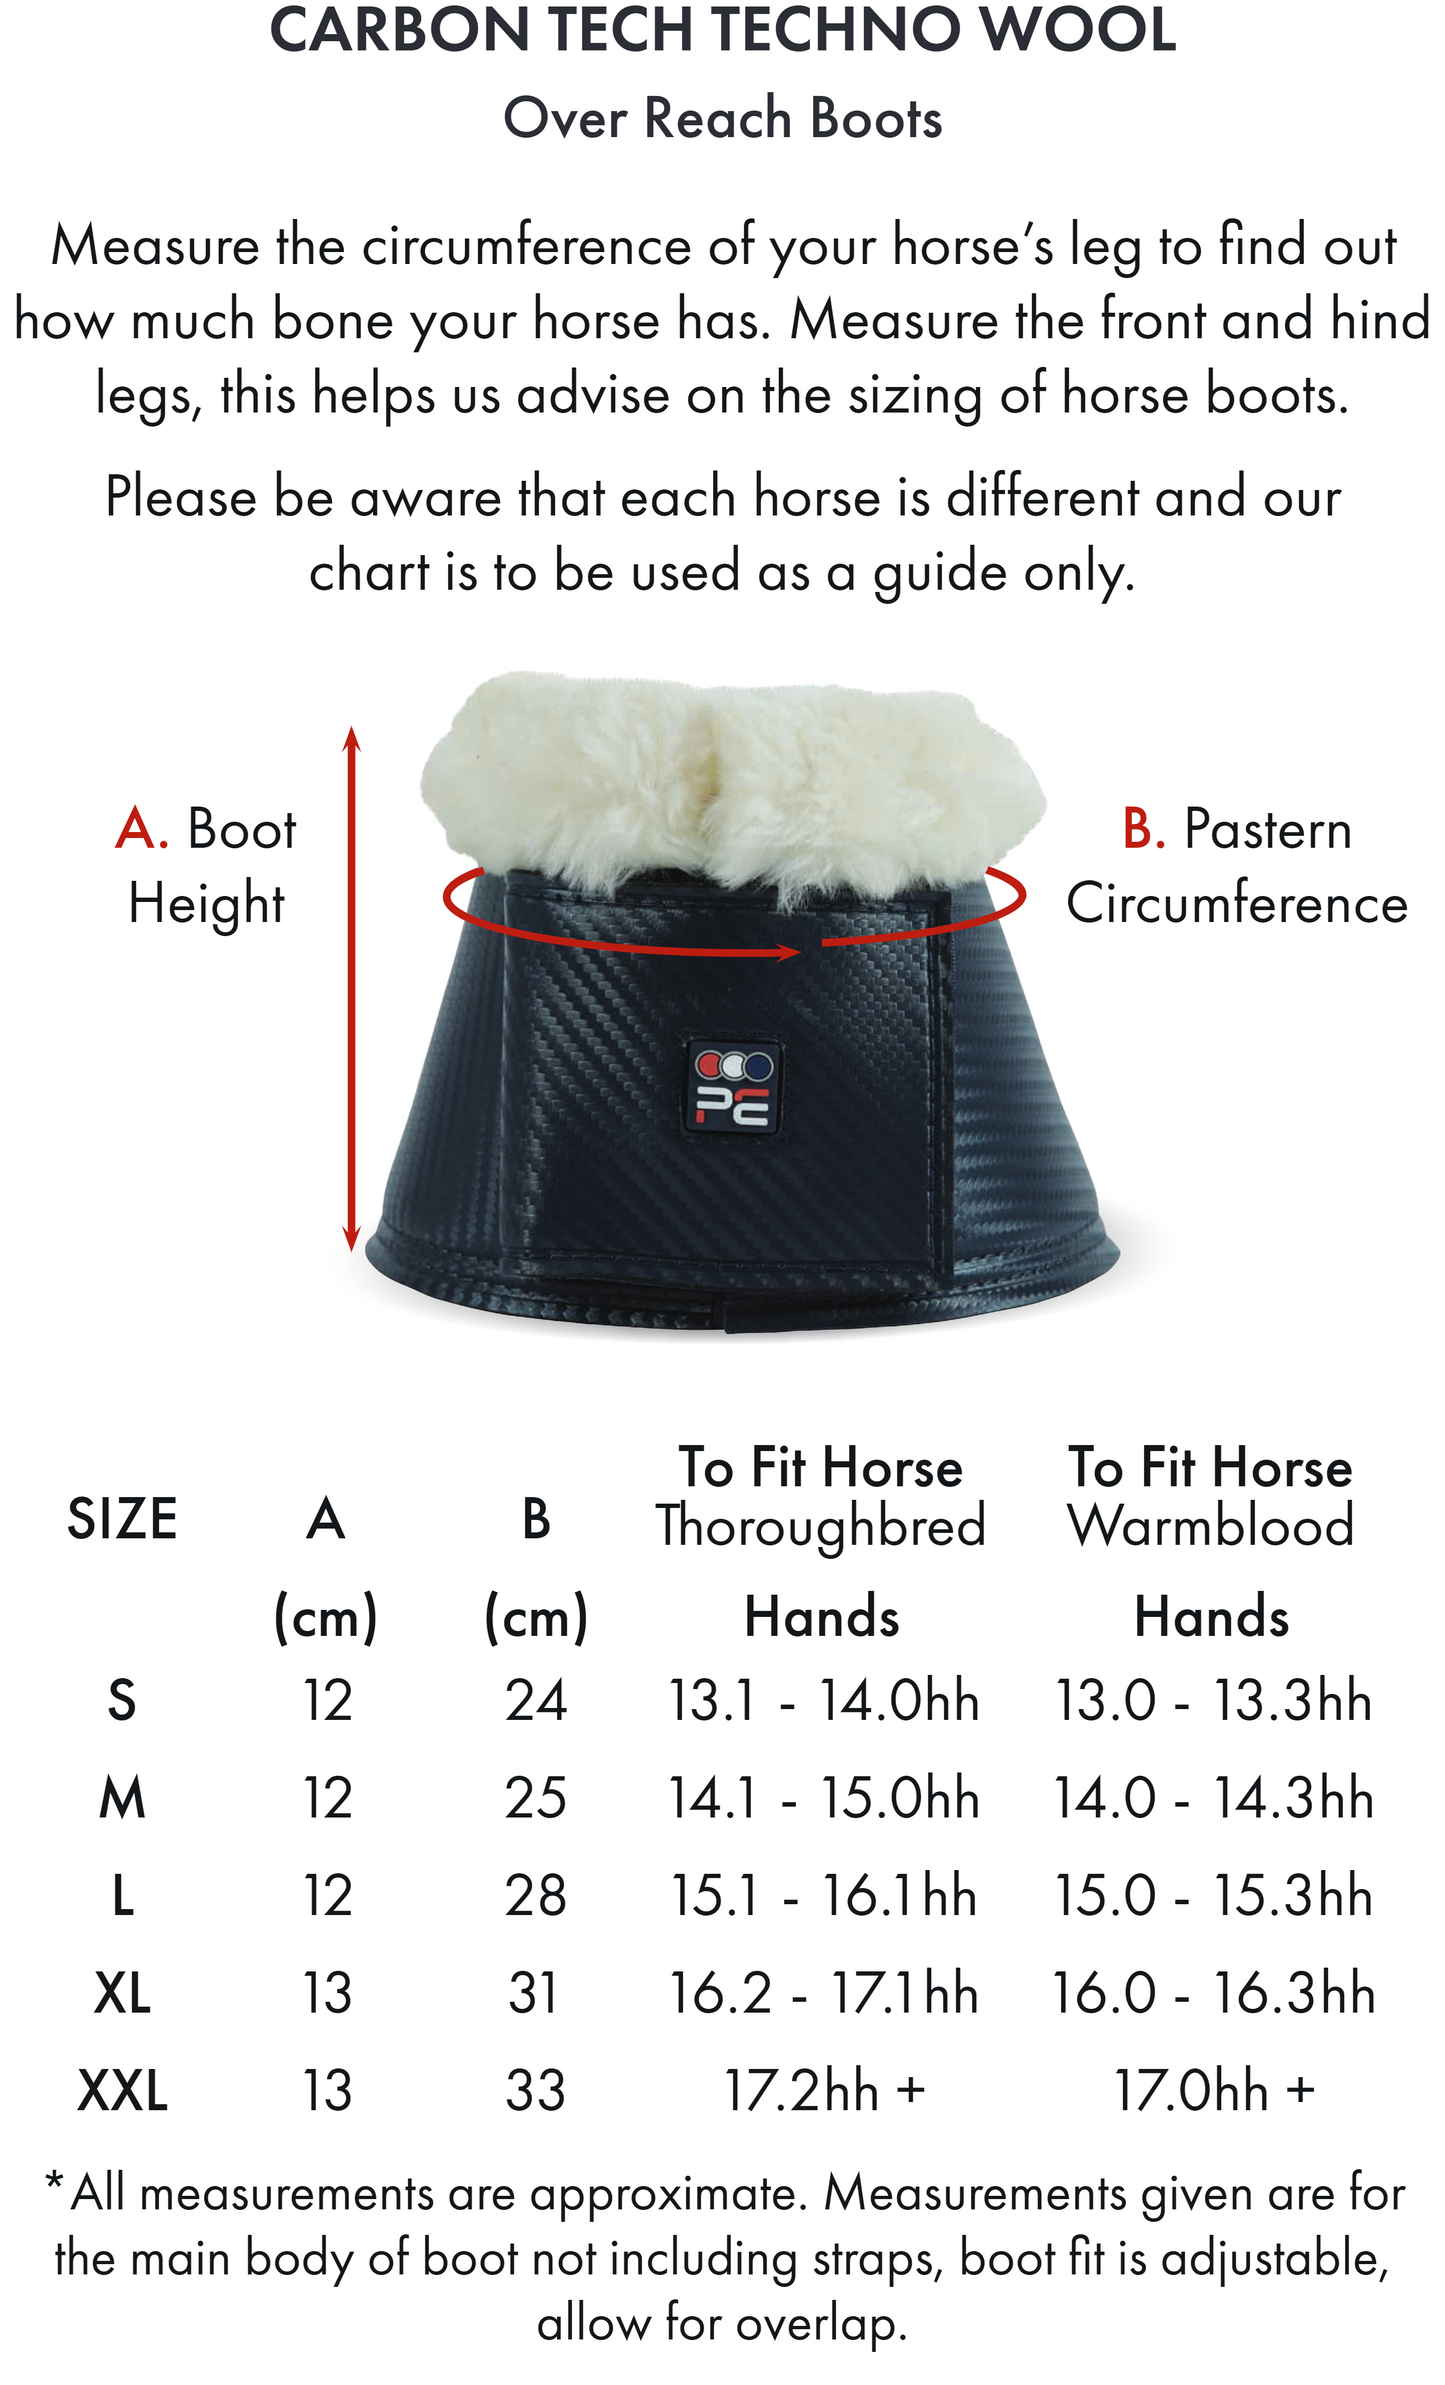 Premier Equine Carbon Tech Techno Wool Over Reach Boot